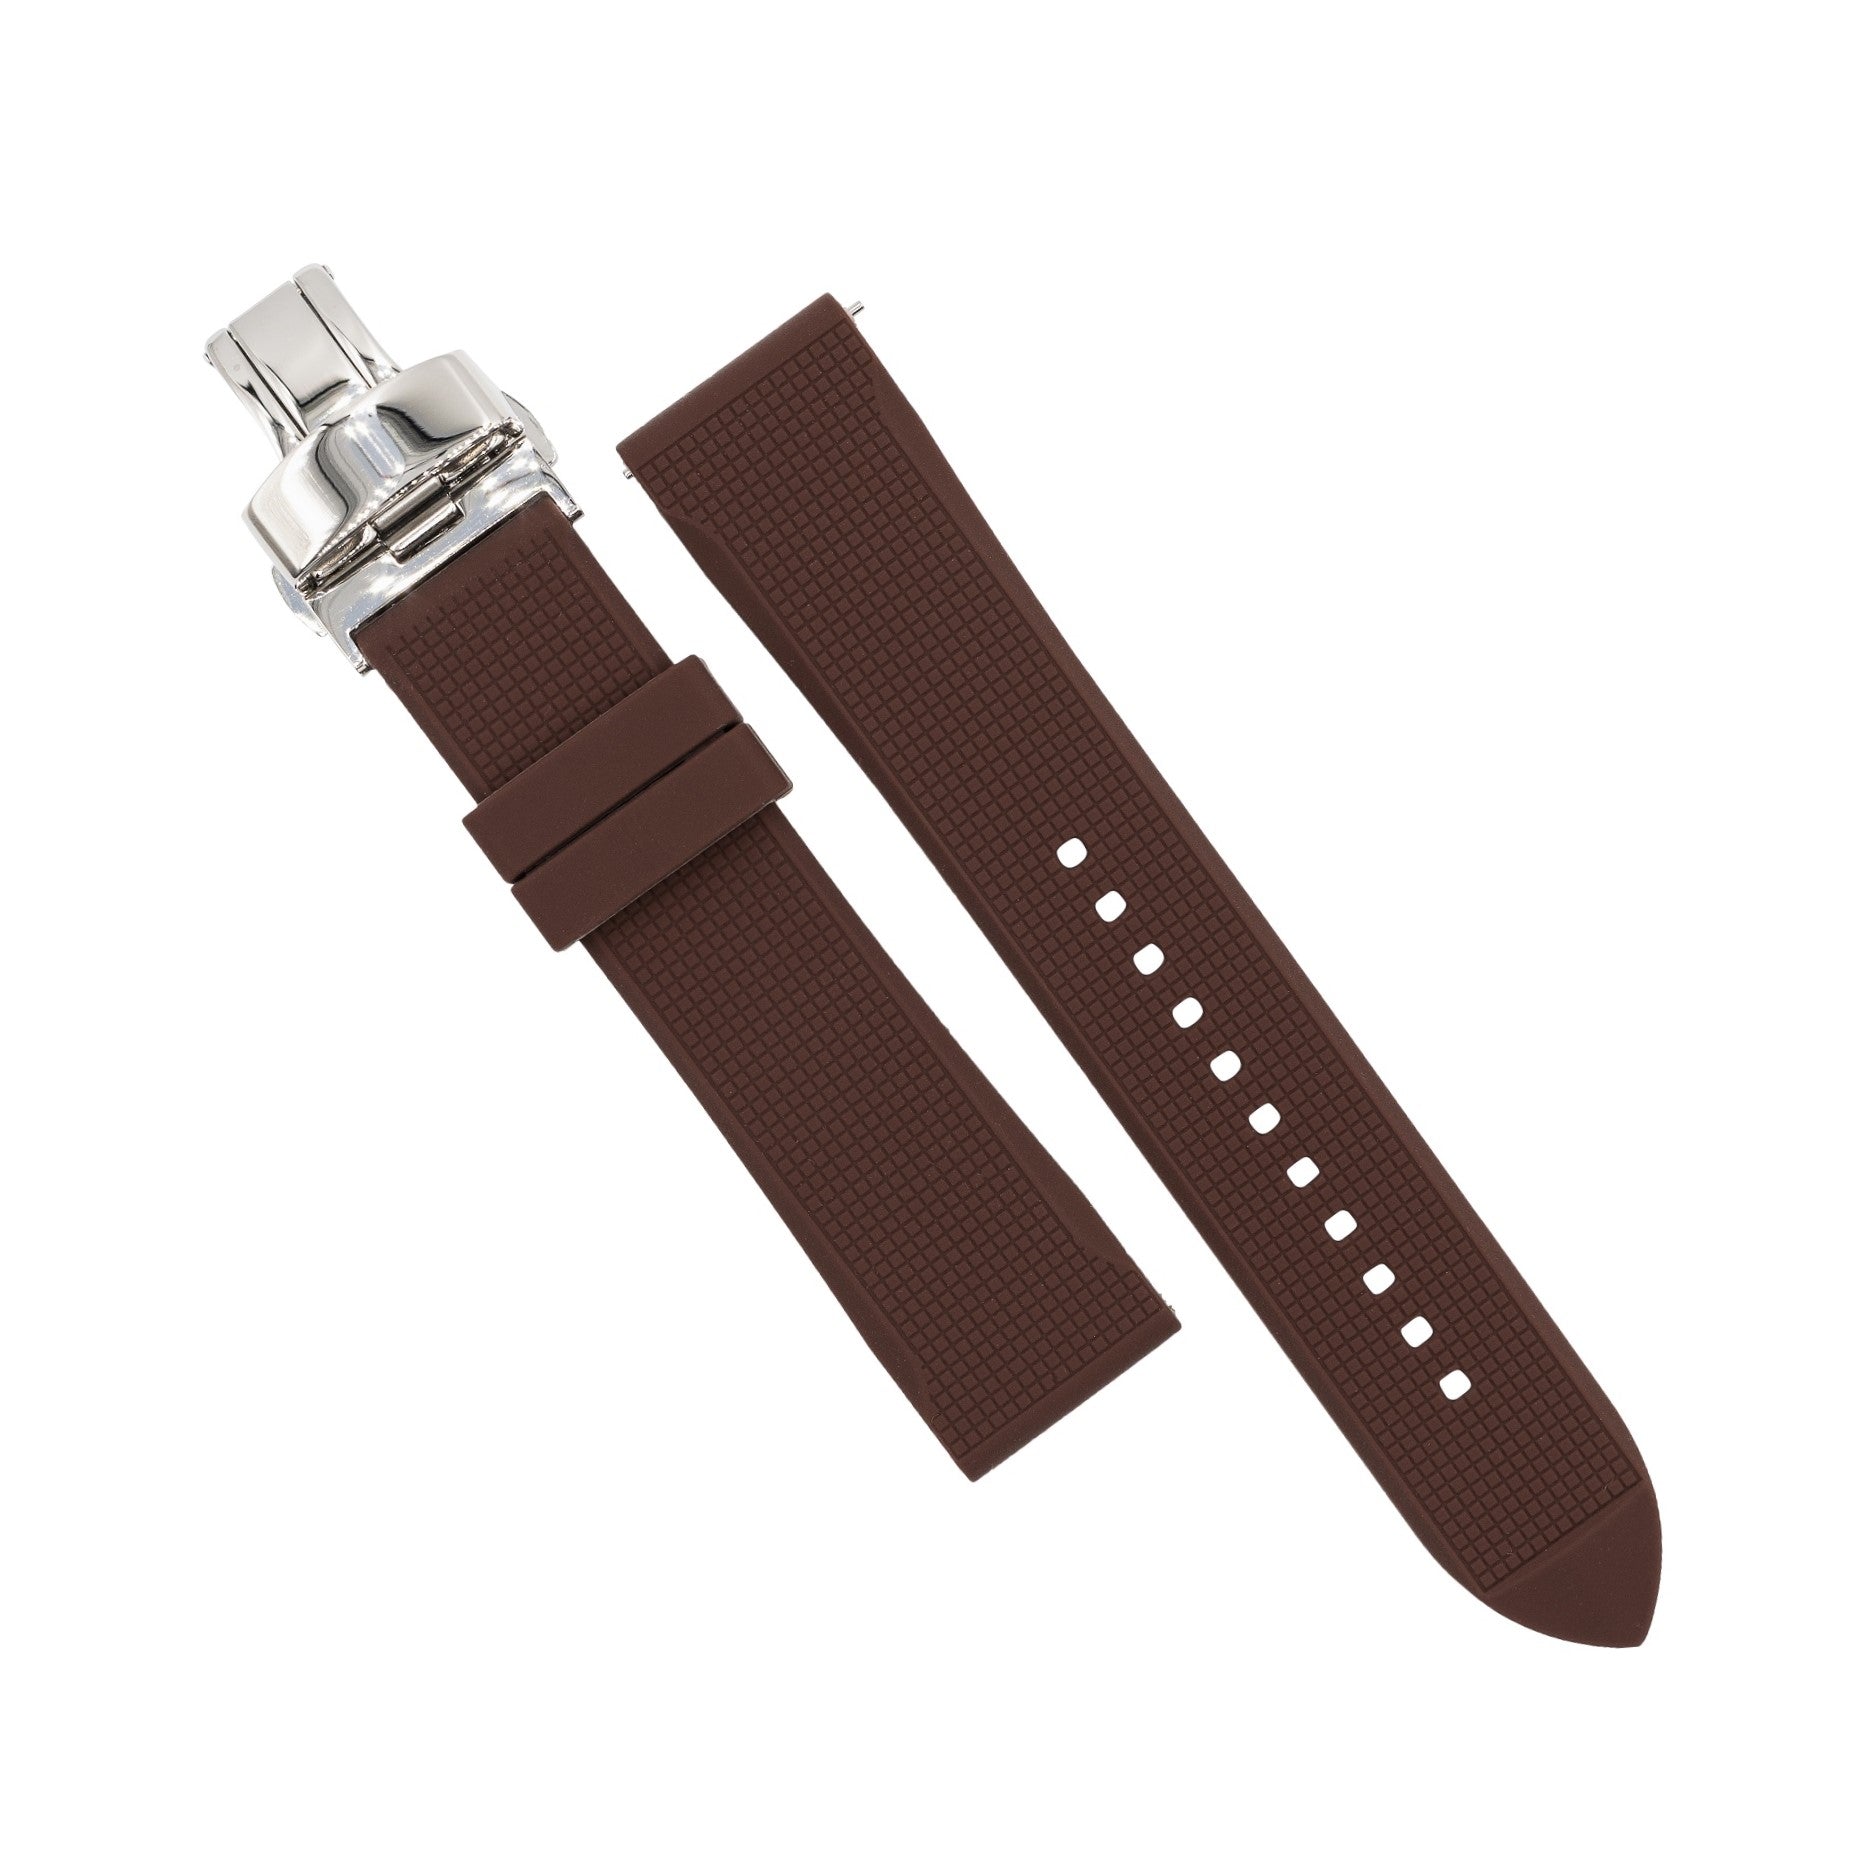 Silicone Rubber Strap w/ Butterfly Clasp in Brown (18mm) - Nomad Watch Works MY